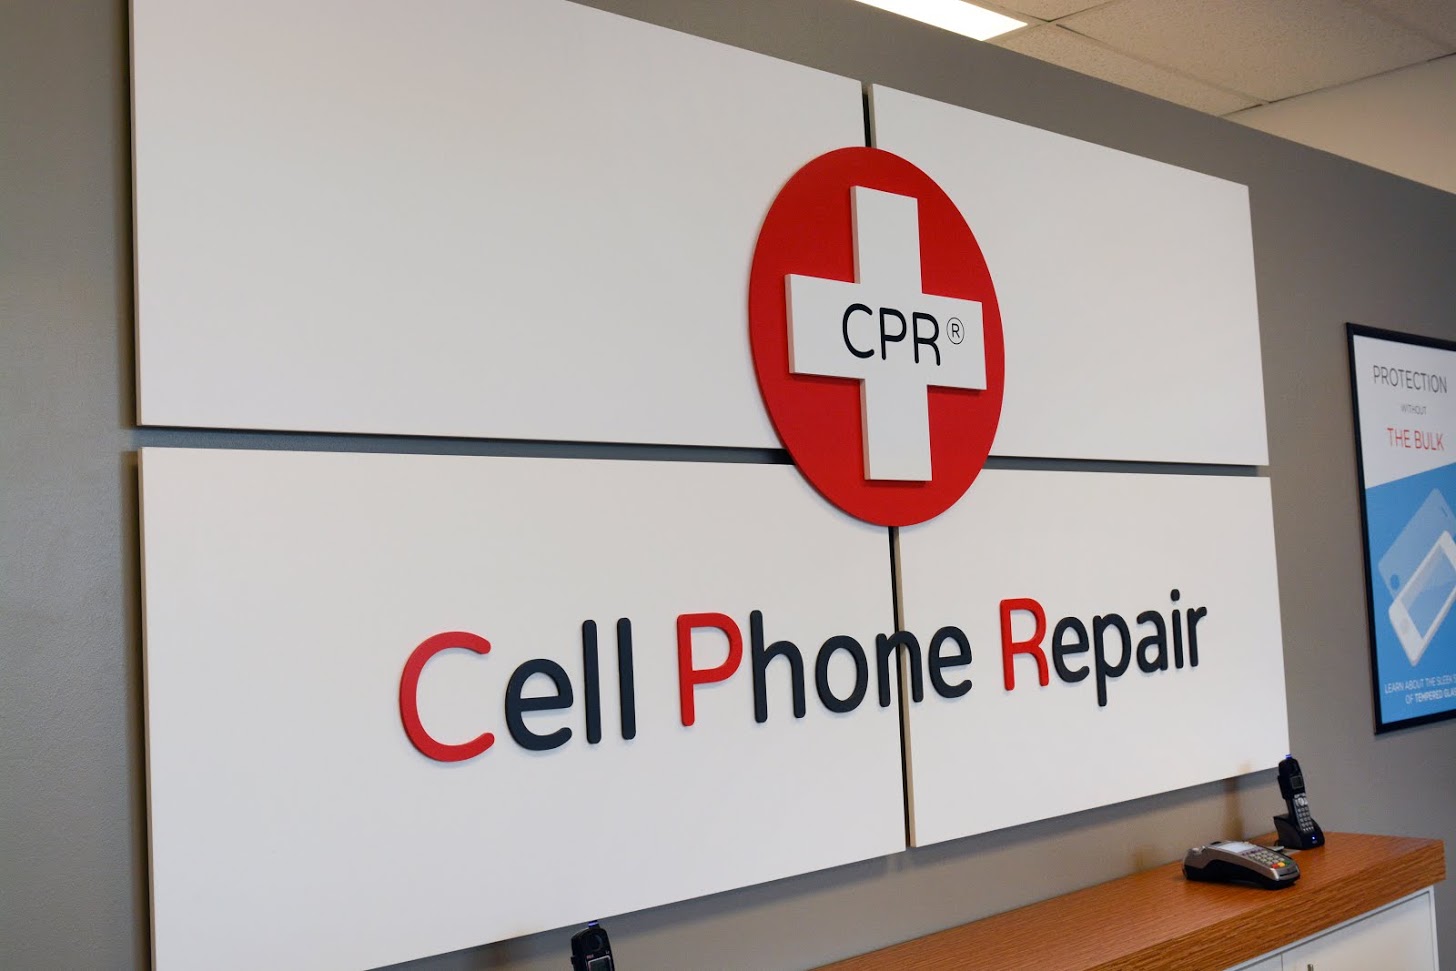 CPR Cell Phone Repair, Thursday, September 19, 2019, Press release picture